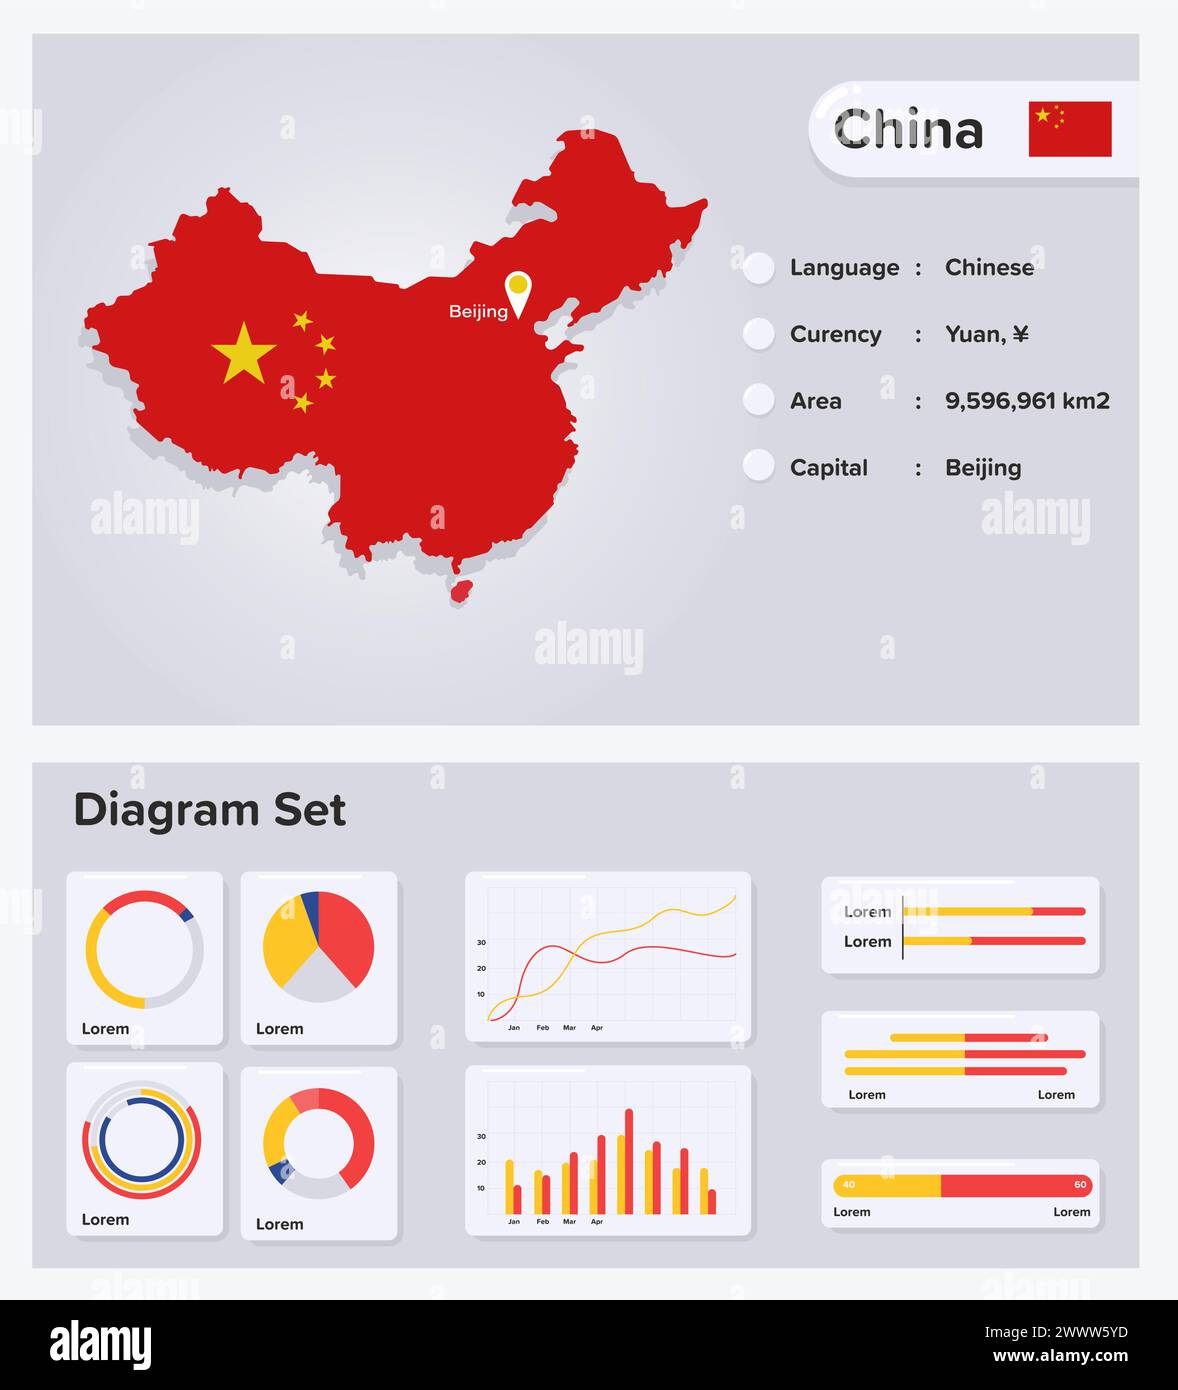 Republic Of China Infographic Vector Illustration, China Statistical Data Element, Information Board With Flag Map, China Map Flag With Diagram Set Fl Stock Vector